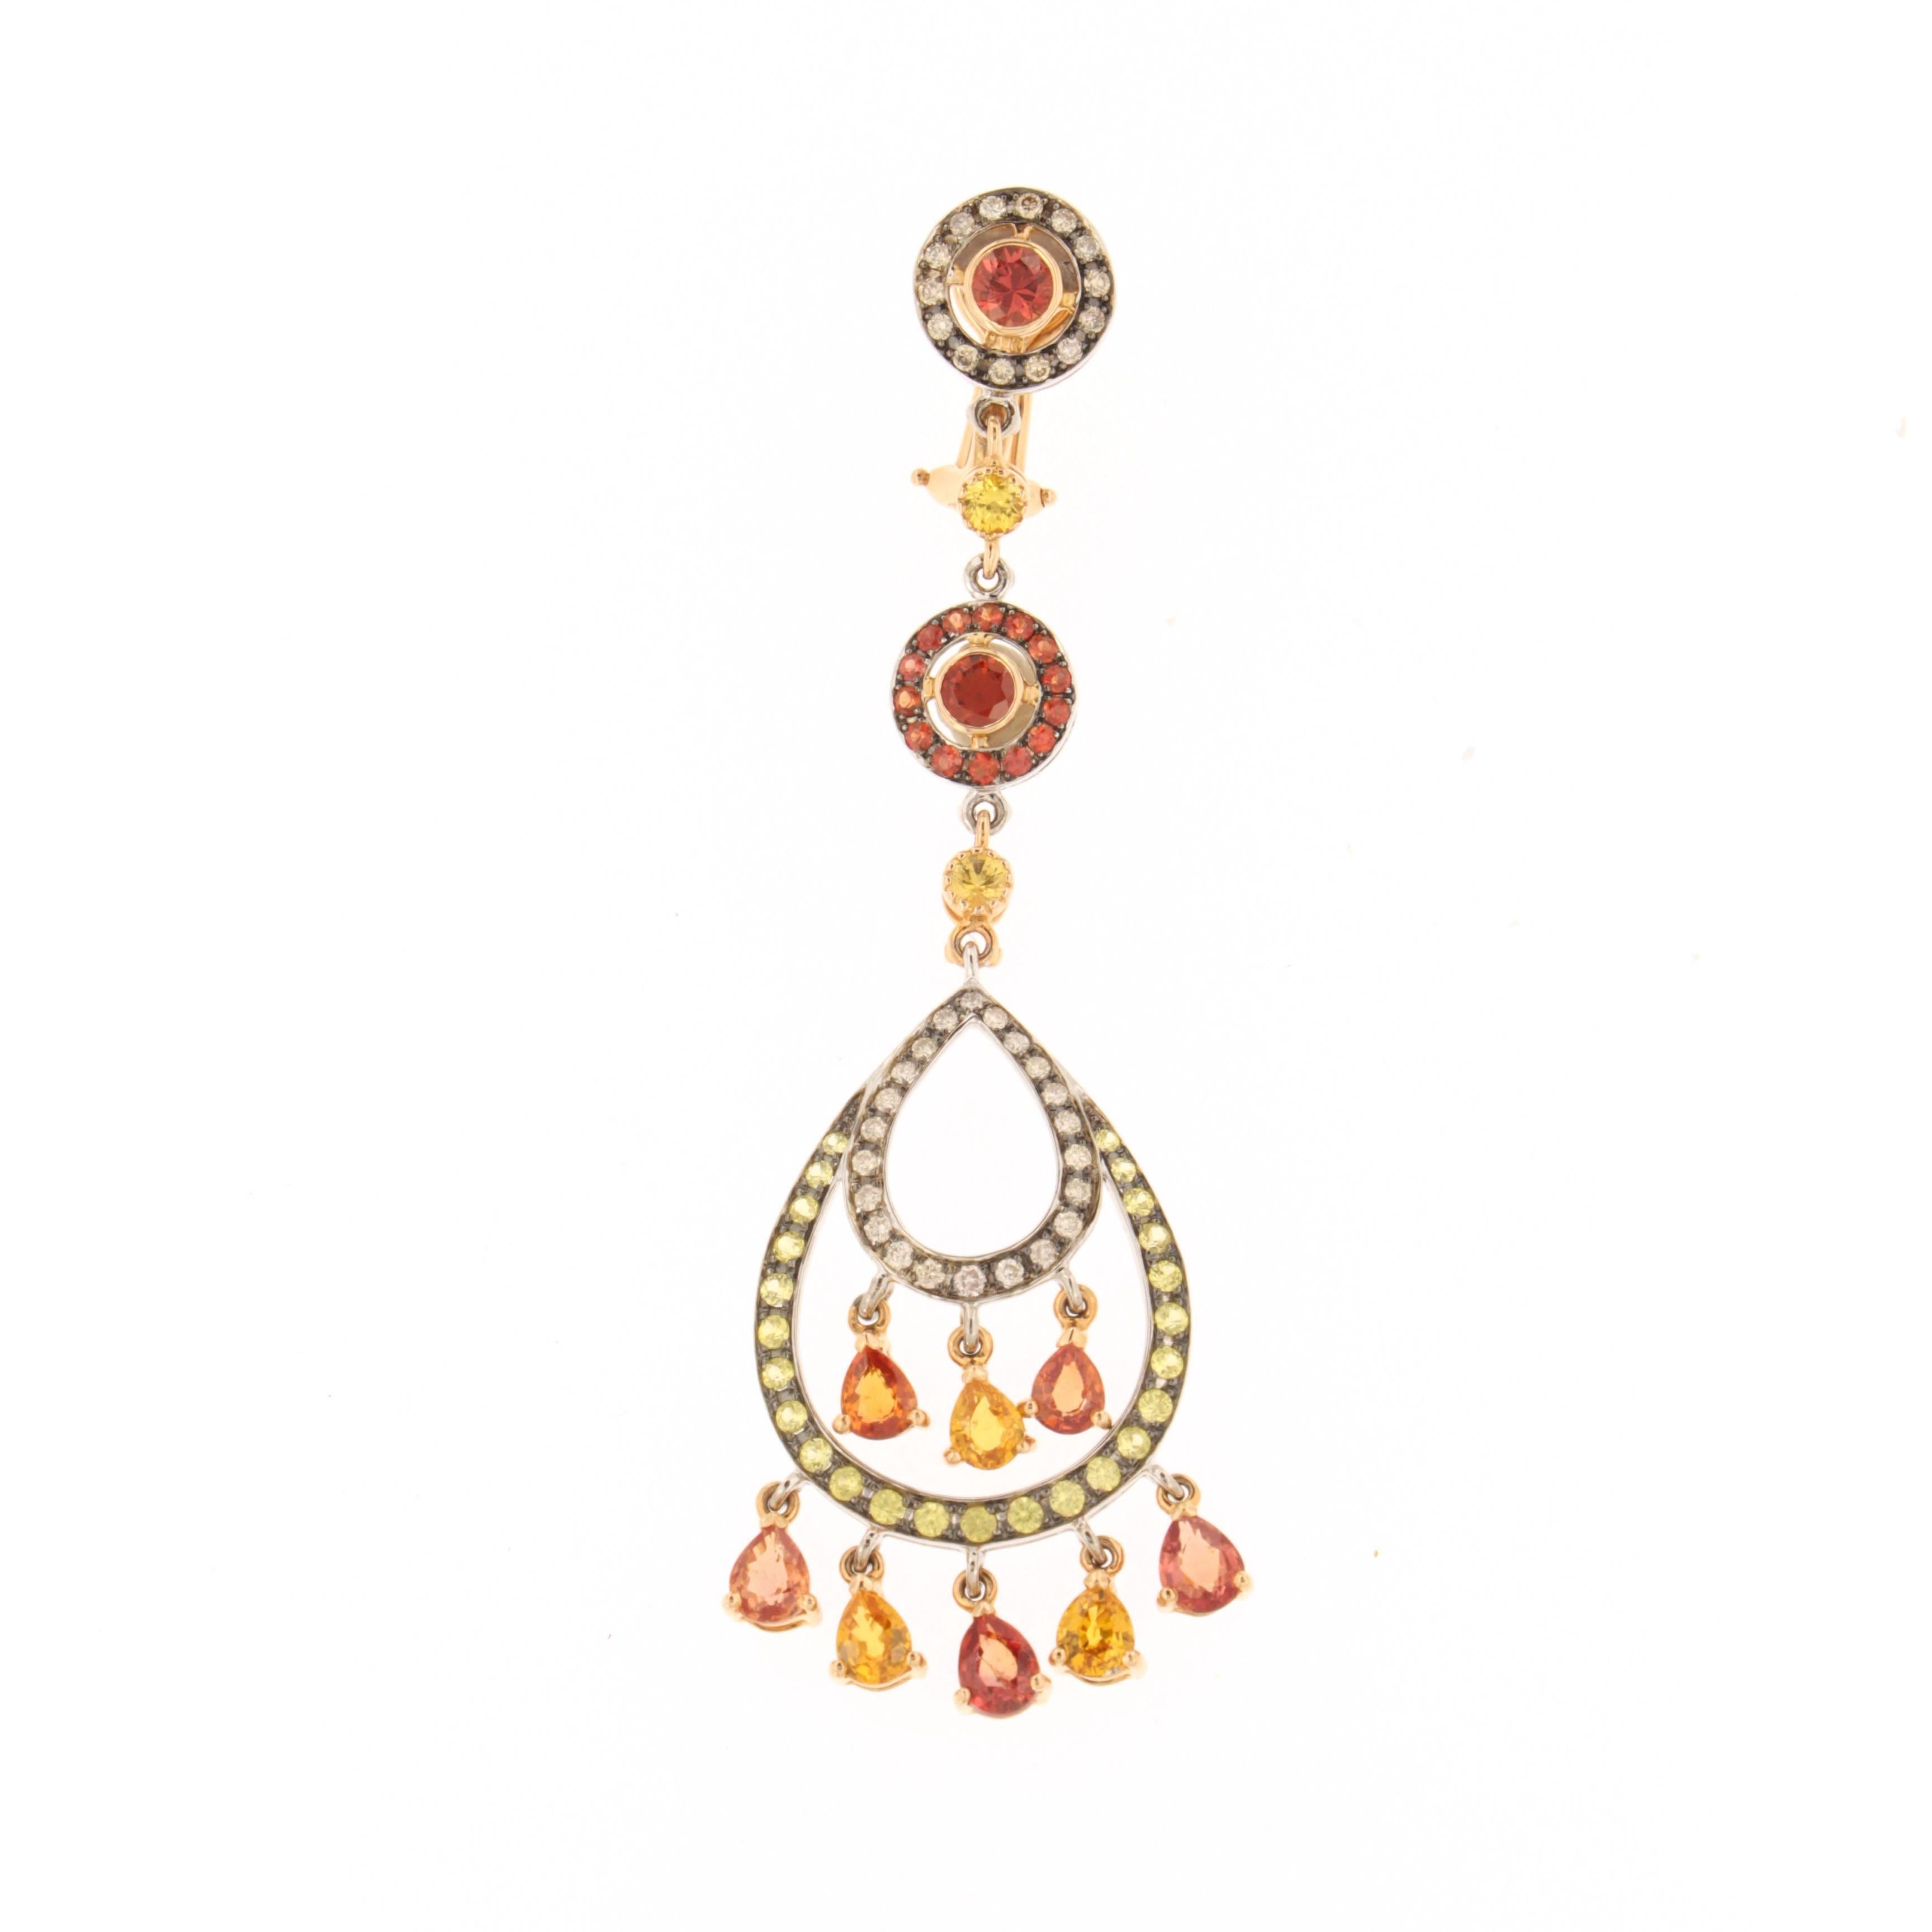 Inspired from the seductive flamenco dance from Madrid in the 15th century, the Feria earrings, a Zorab Creation, will set your heels ablaze.

Turn up your personal flame with 7.36 carats of orange sapphires, 5.70 carats of yellow sapphires, fiery